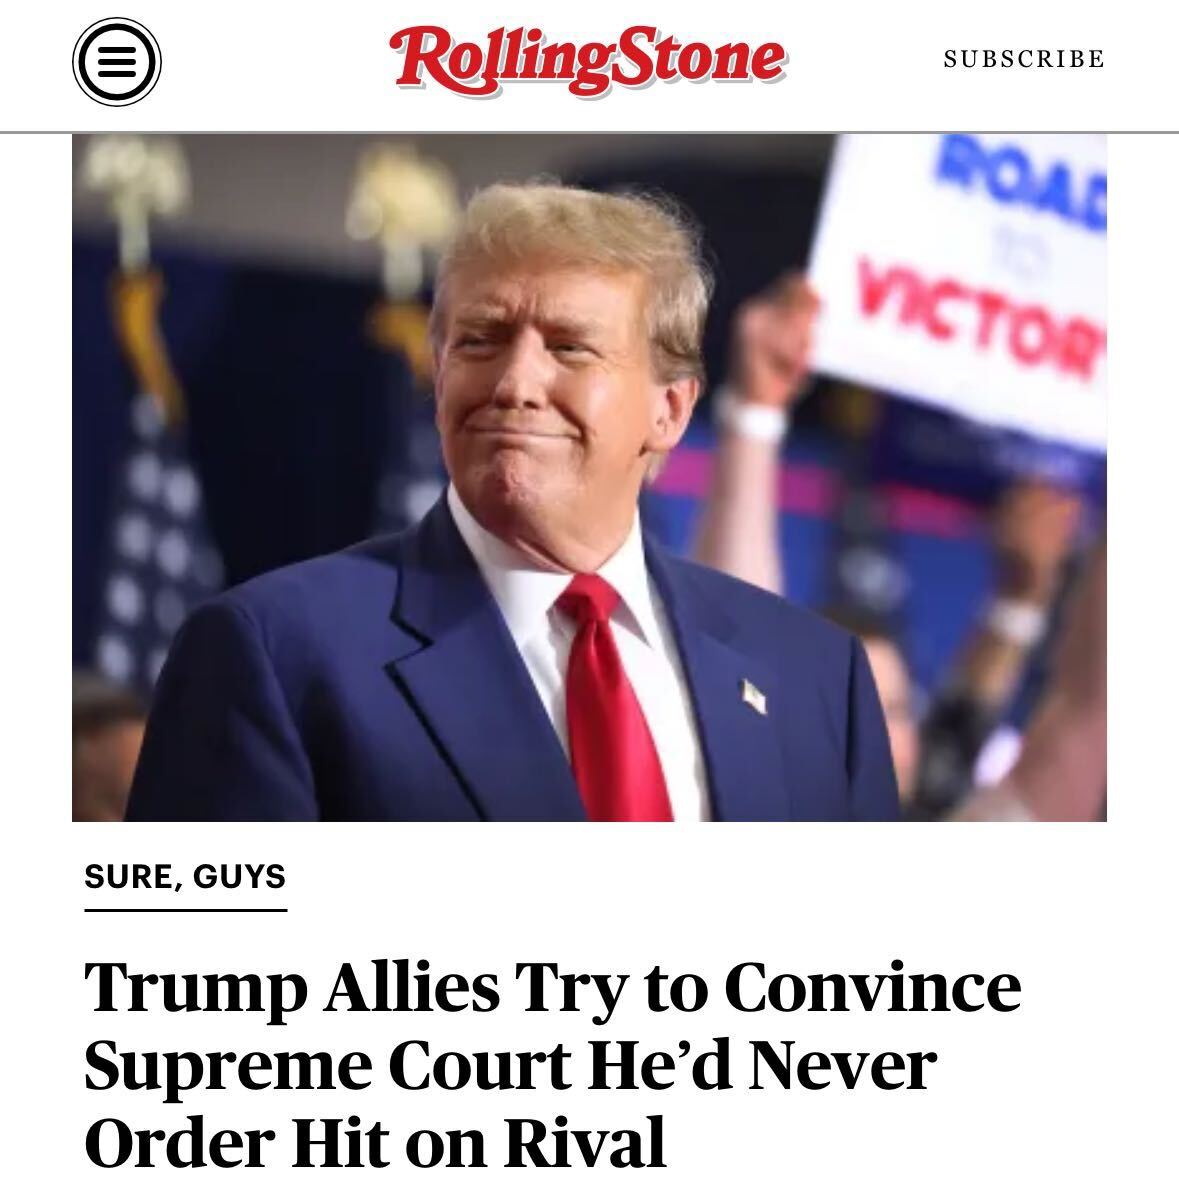 NEW: Trump allies recently told the Supreme Court to forget all about when the former president’s lawyer told judges that he couldn’t be prosecuted for ordering a hit on his political rival — unless he were impeached first. Story: rollingstone.com/politics/polit…